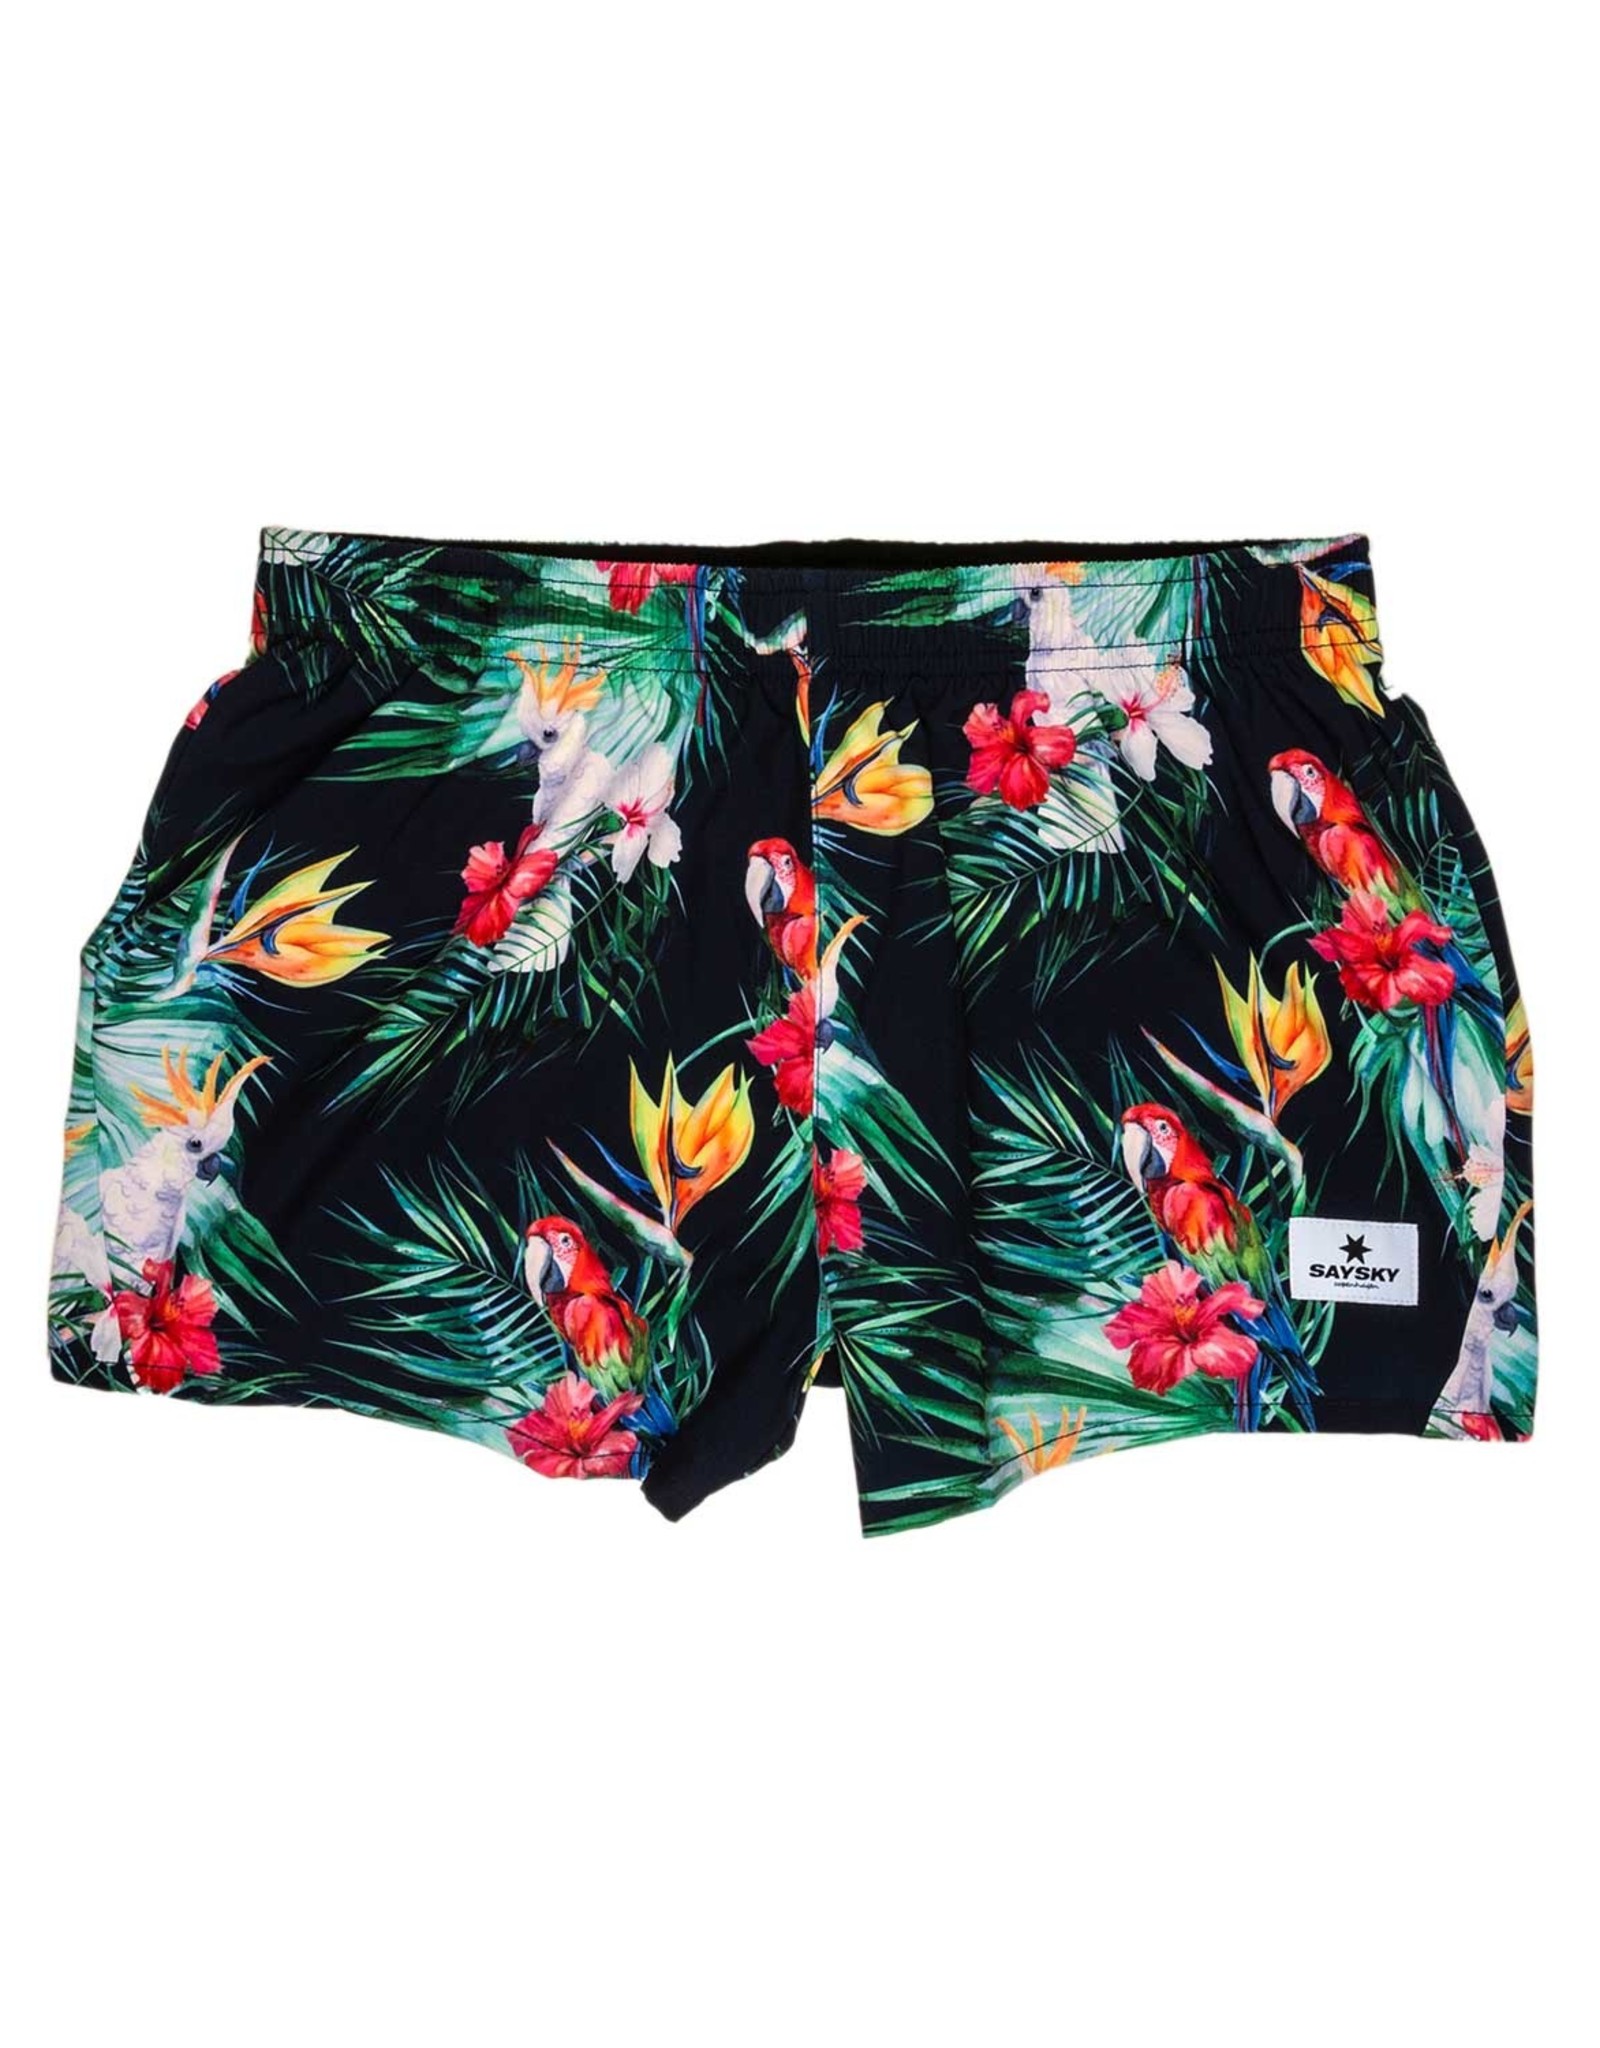 Saysky wmns Flowers Pace shorts 3"